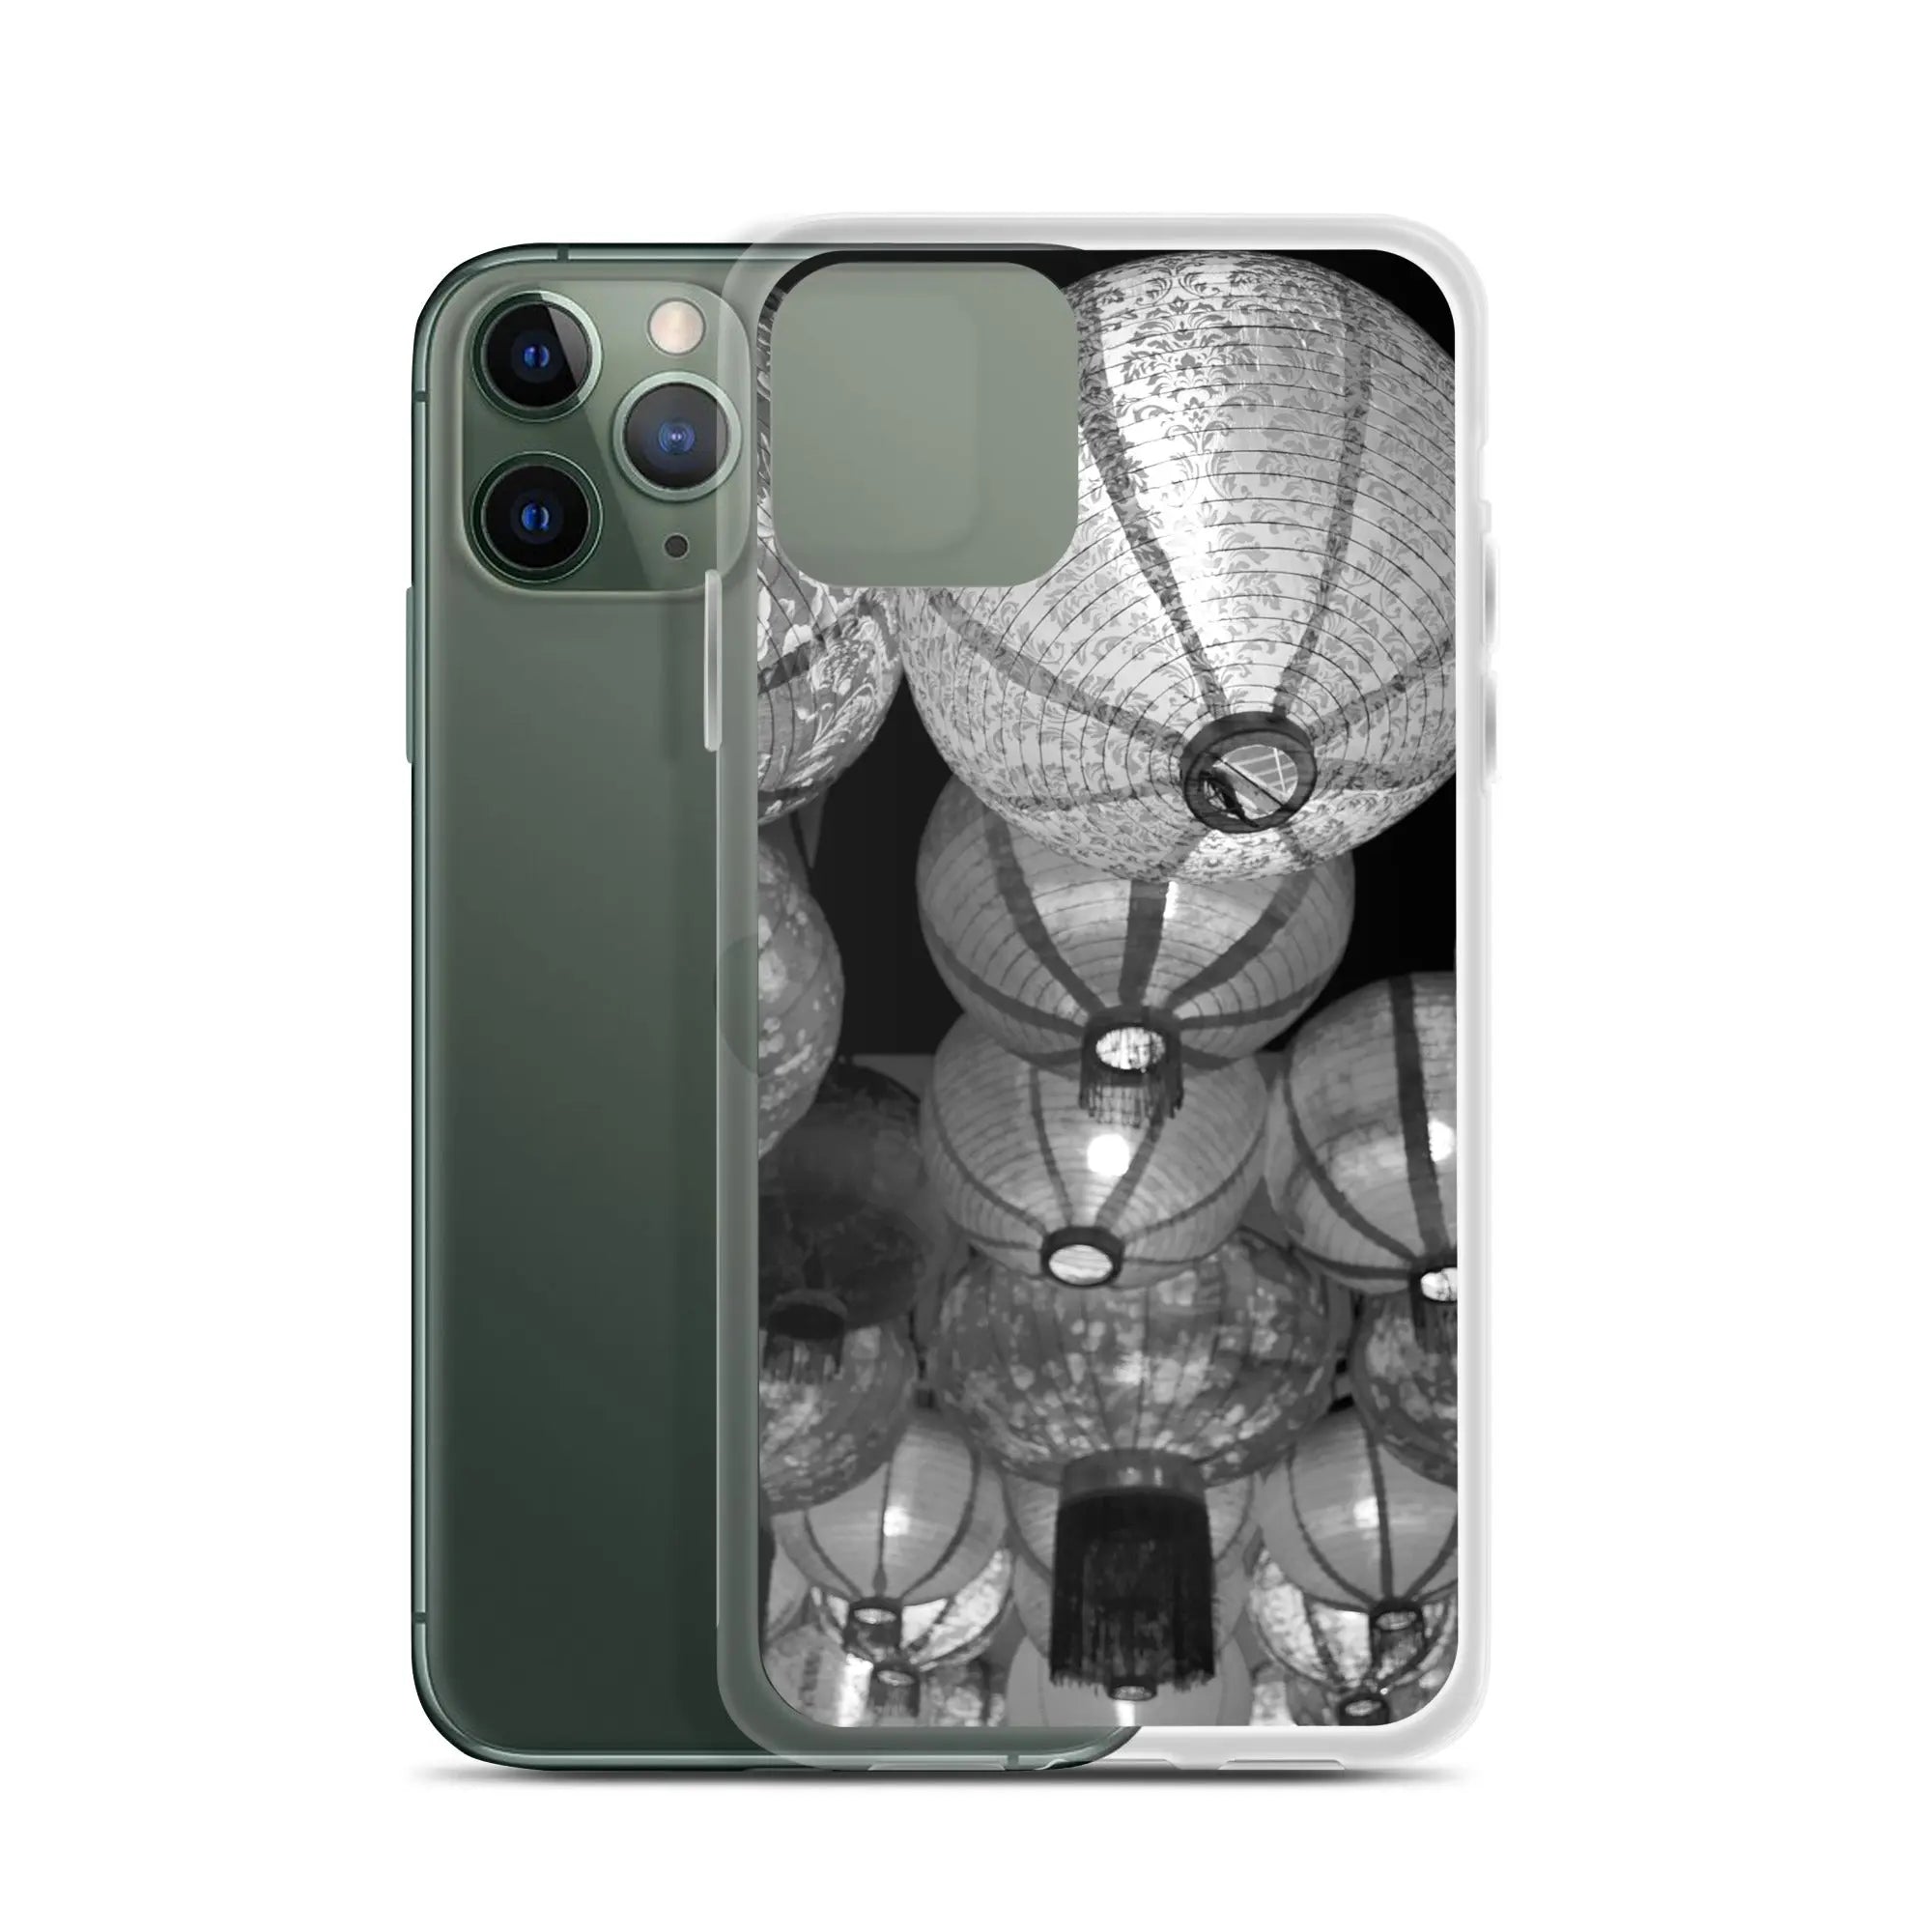 Raise The Red Lanterns - Designer Travels Art Iphone Case - Black And White - Iphone 11 Pro - Mobile Phone Cases